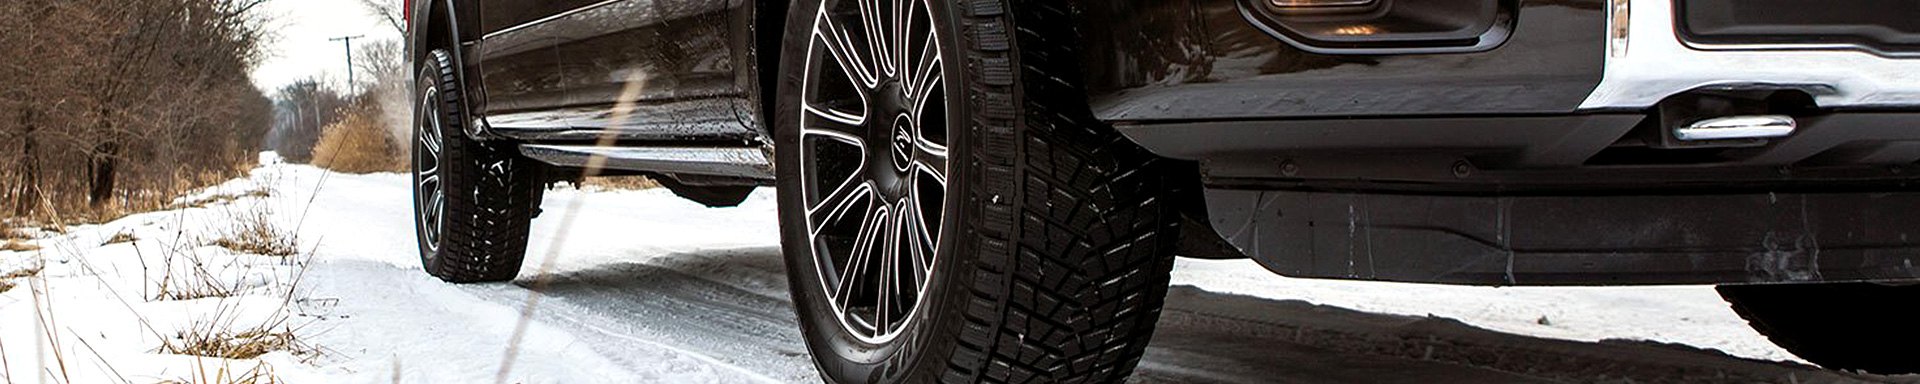 Myth or Truth? AWD Cars Don’t Require Winter Tires in Snow and Ice